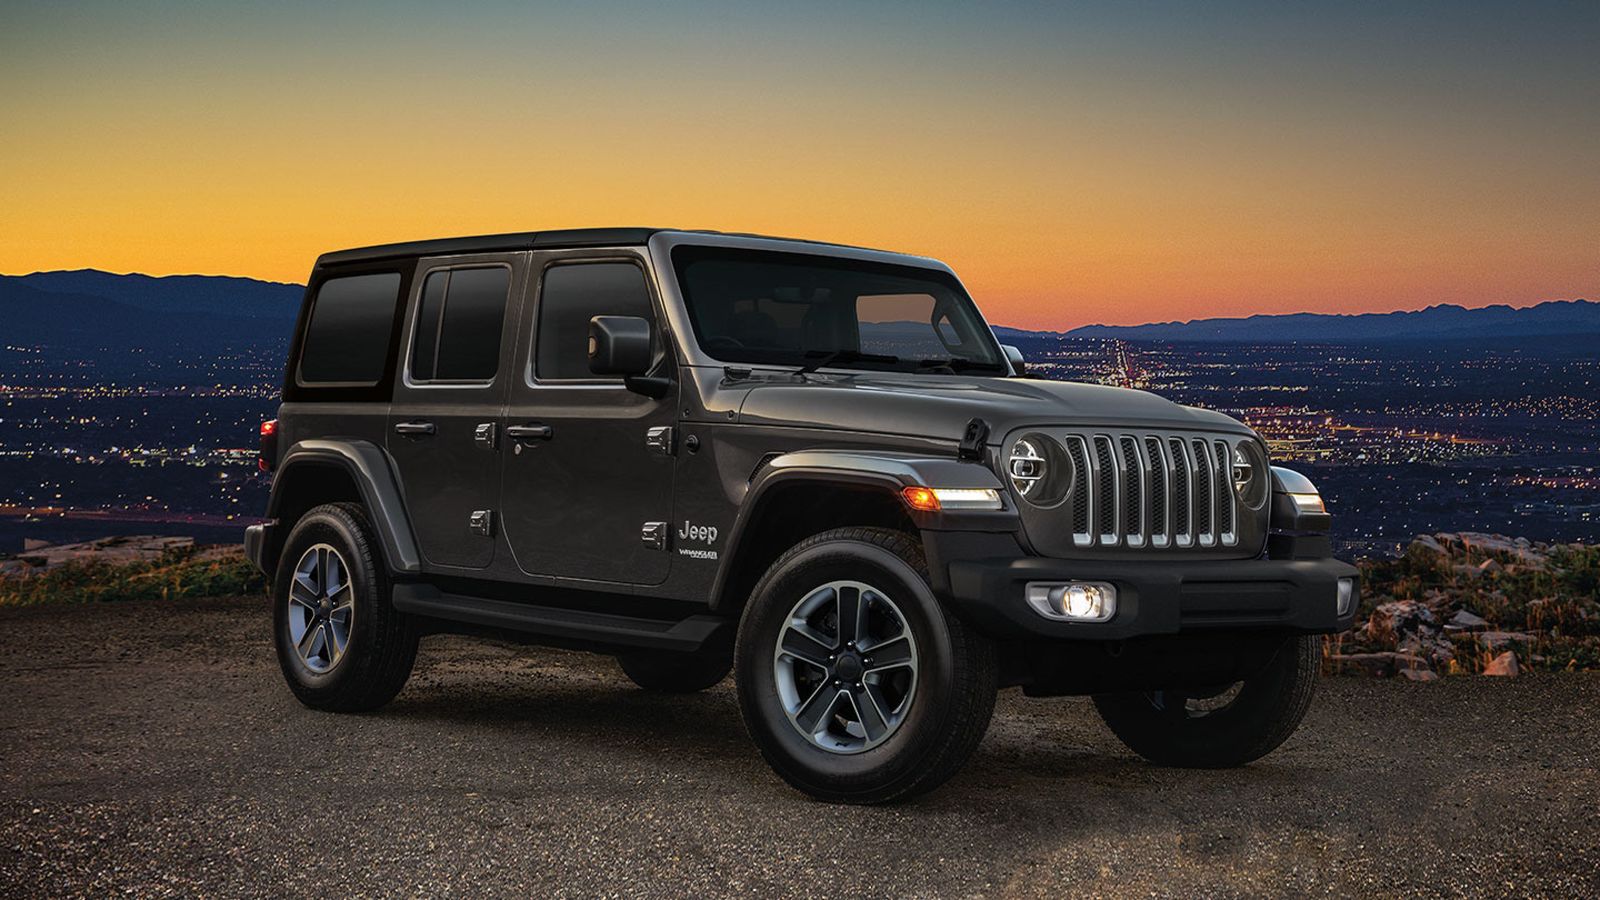 Made in India' Jeep Wrangler gets costlier, price hike of over ₹one lakh |  HT Auto